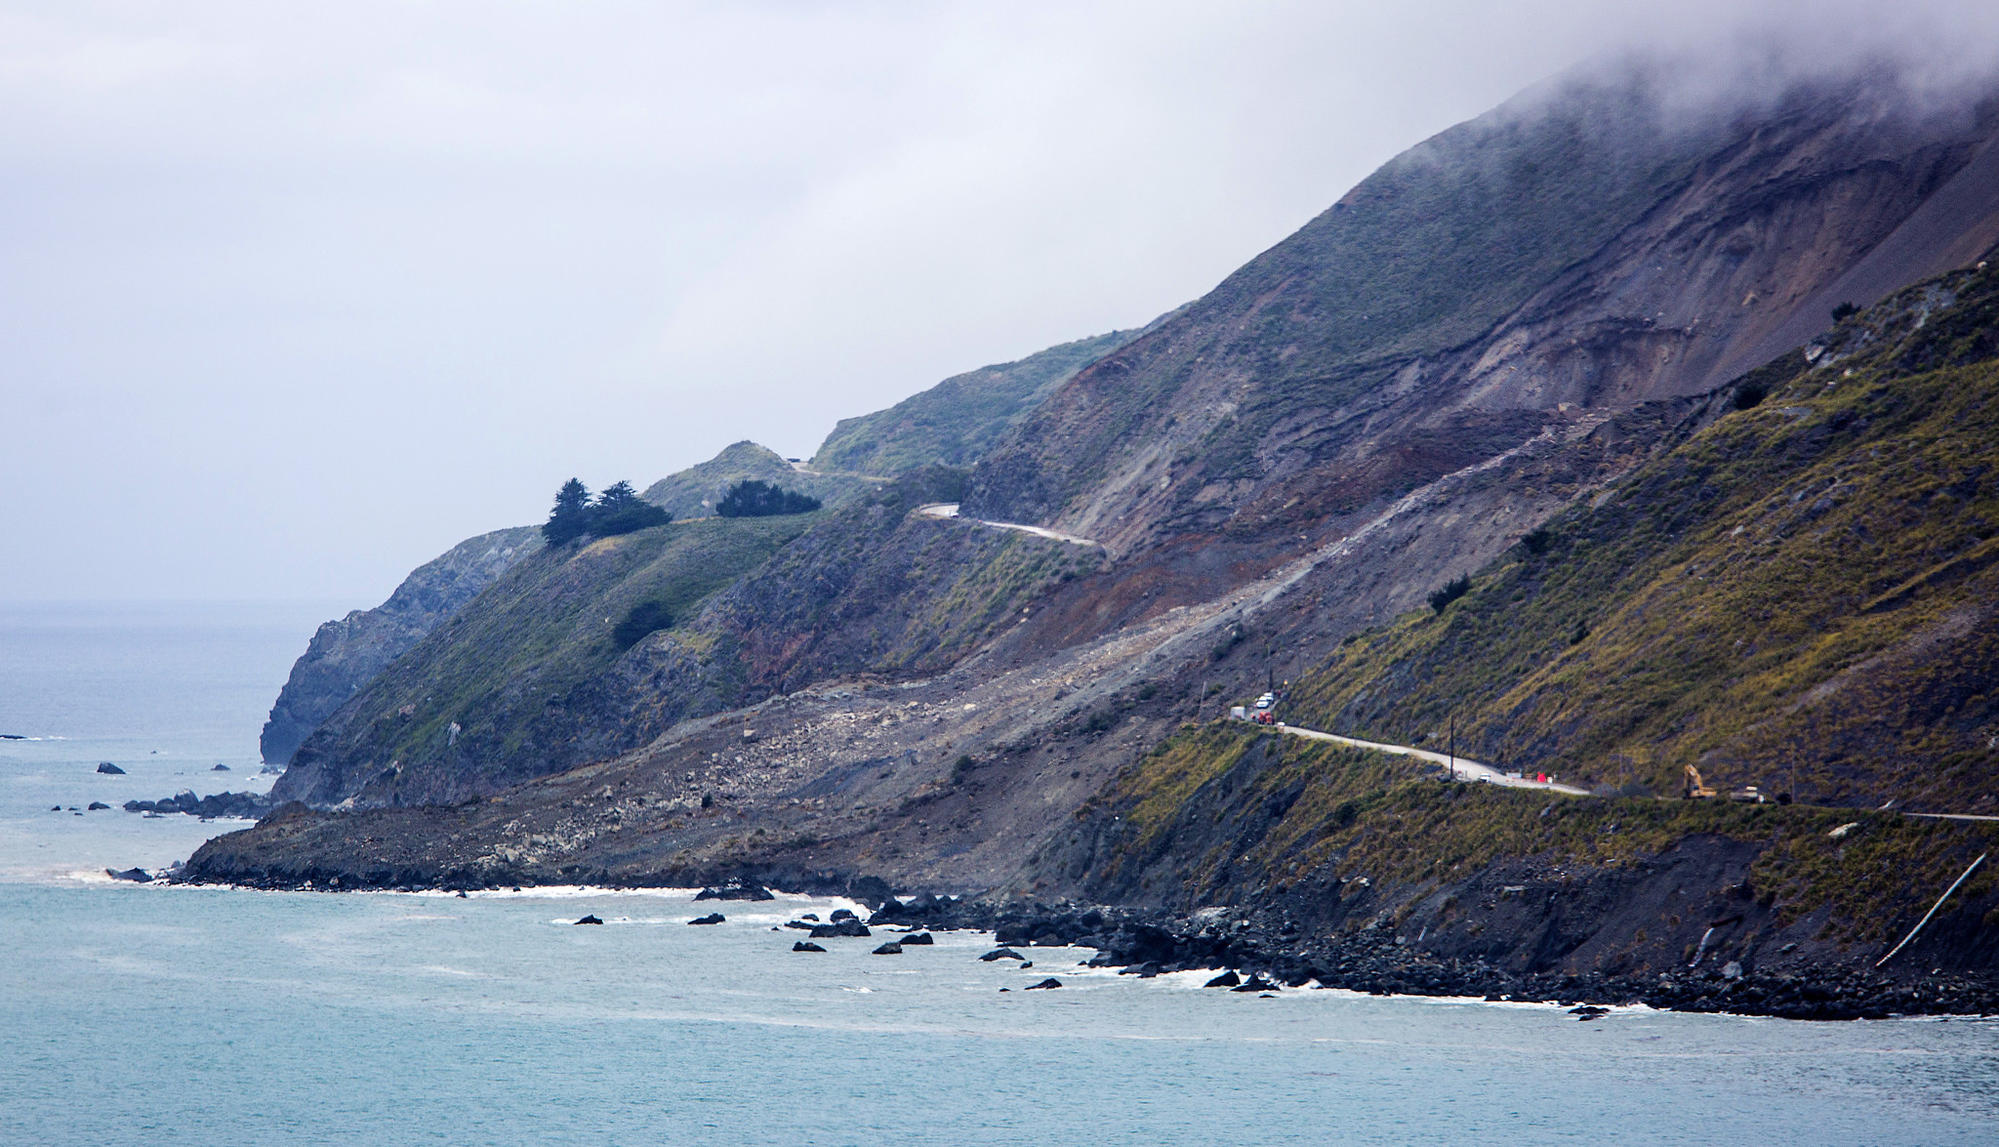 Highway 1 is cut in two where a massive landslide obliterated the road north of Ragged Point.